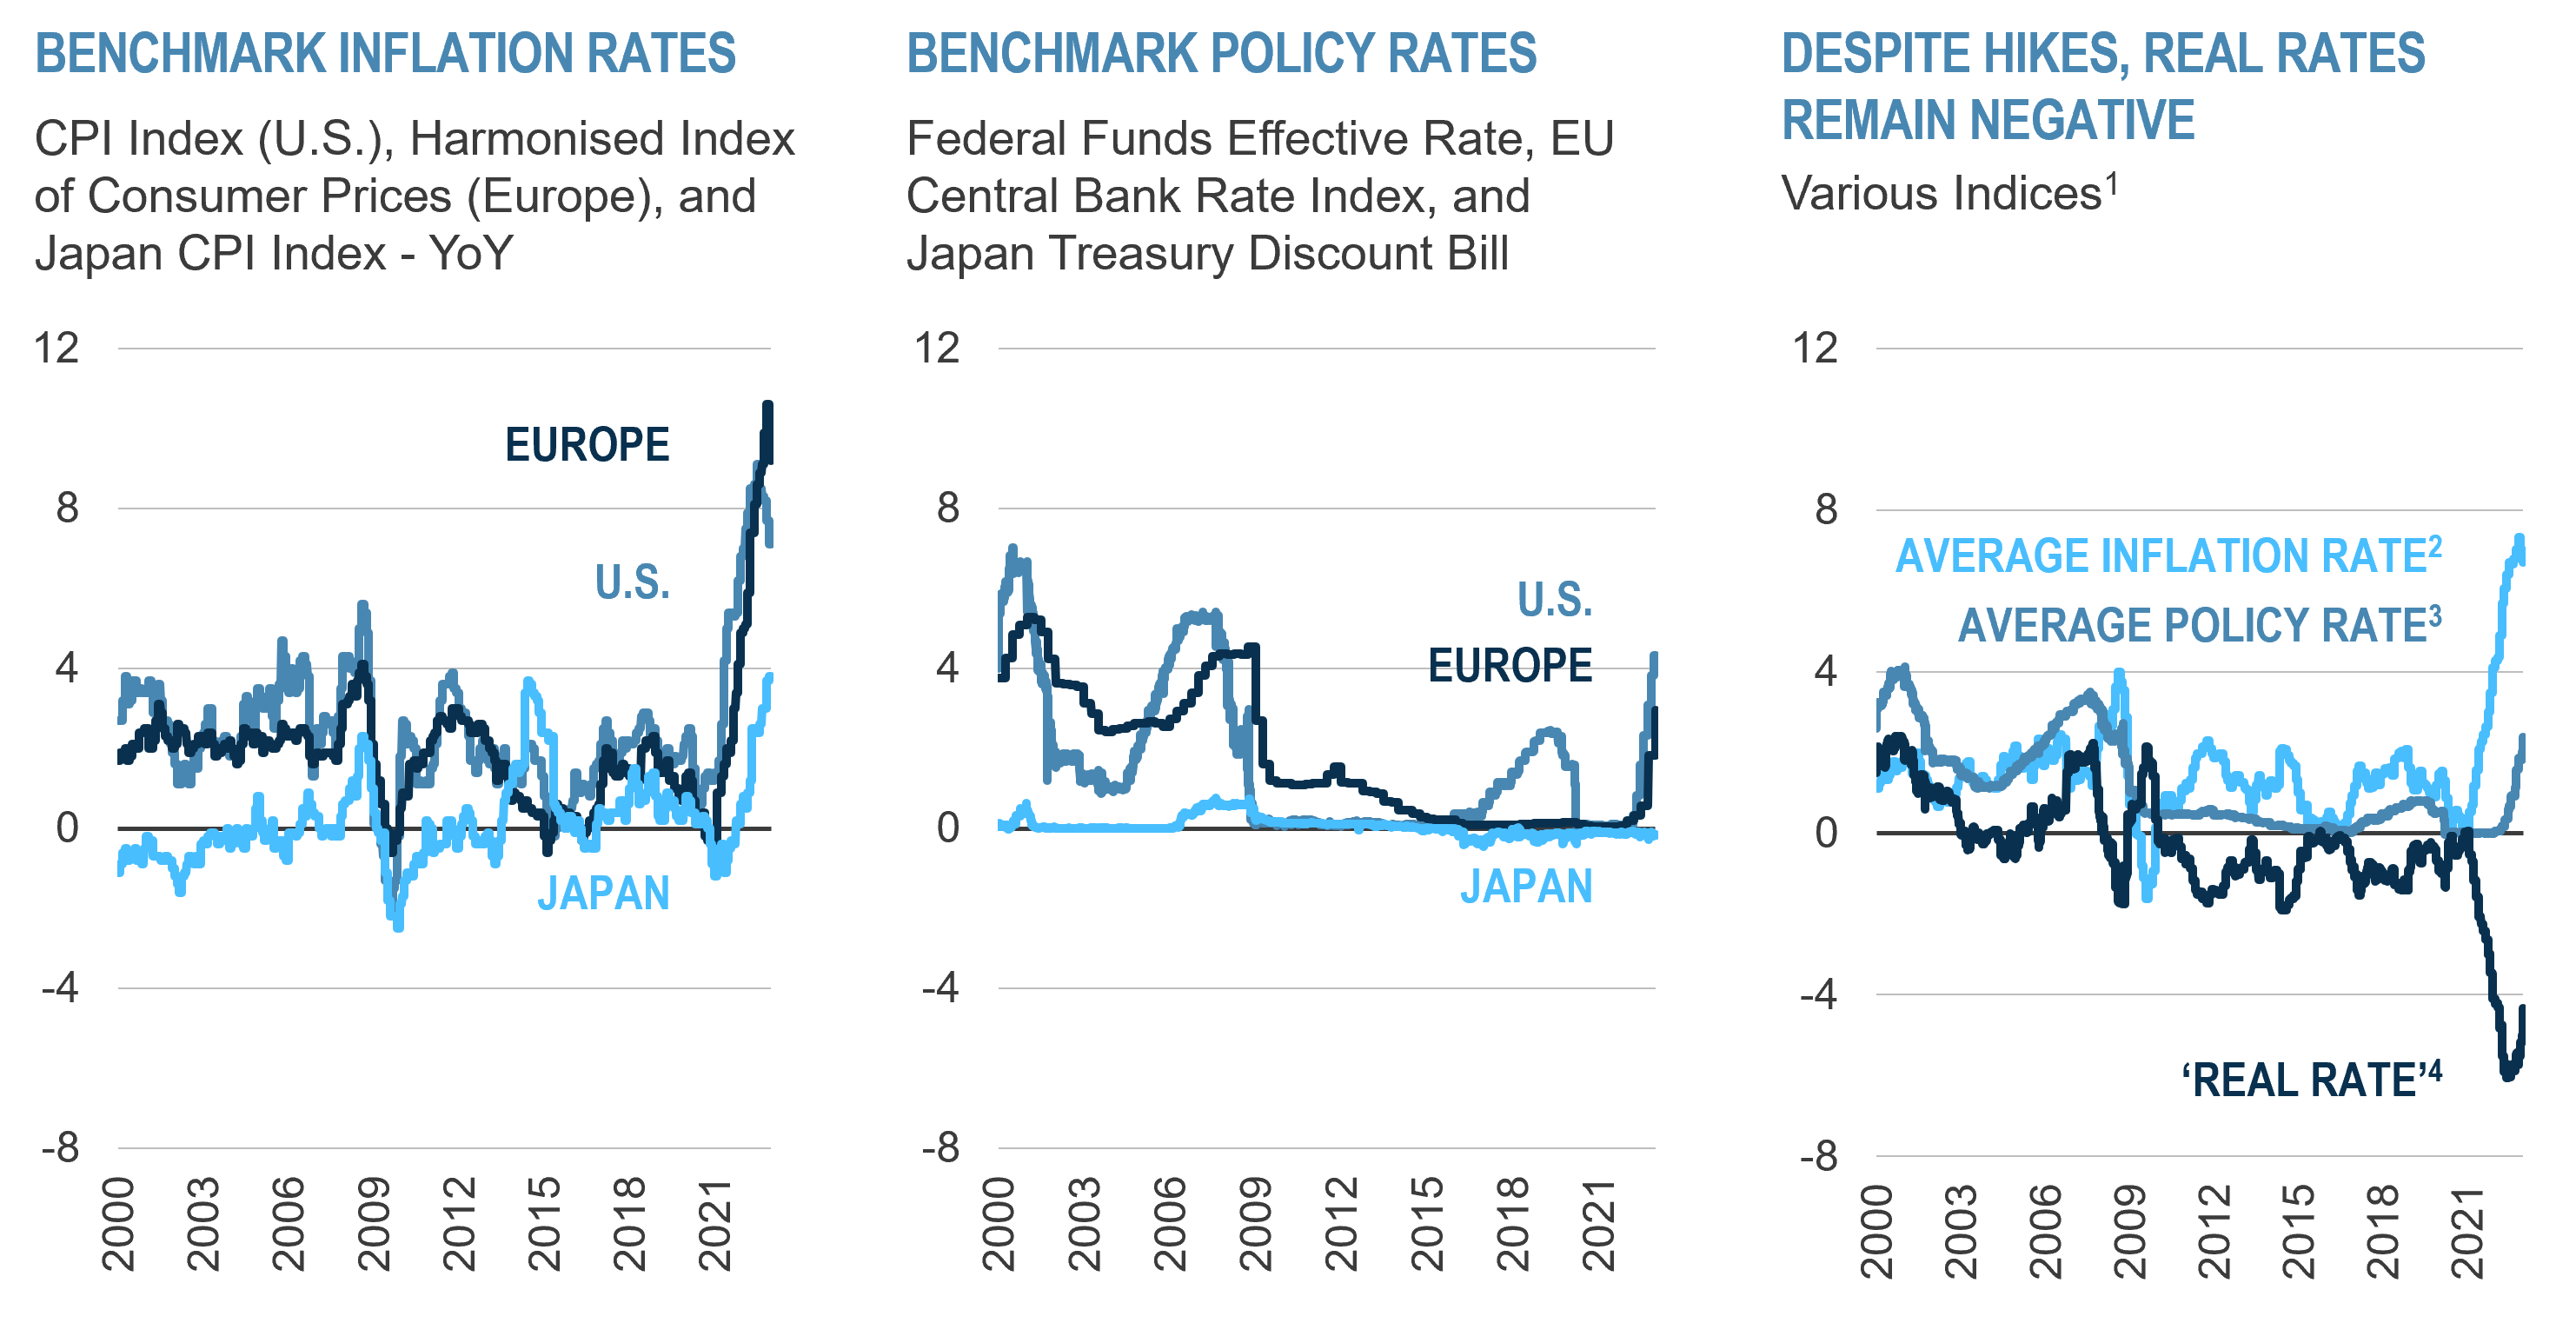 Benchmark inflation rates, benchmark policy rates, and negative real rates